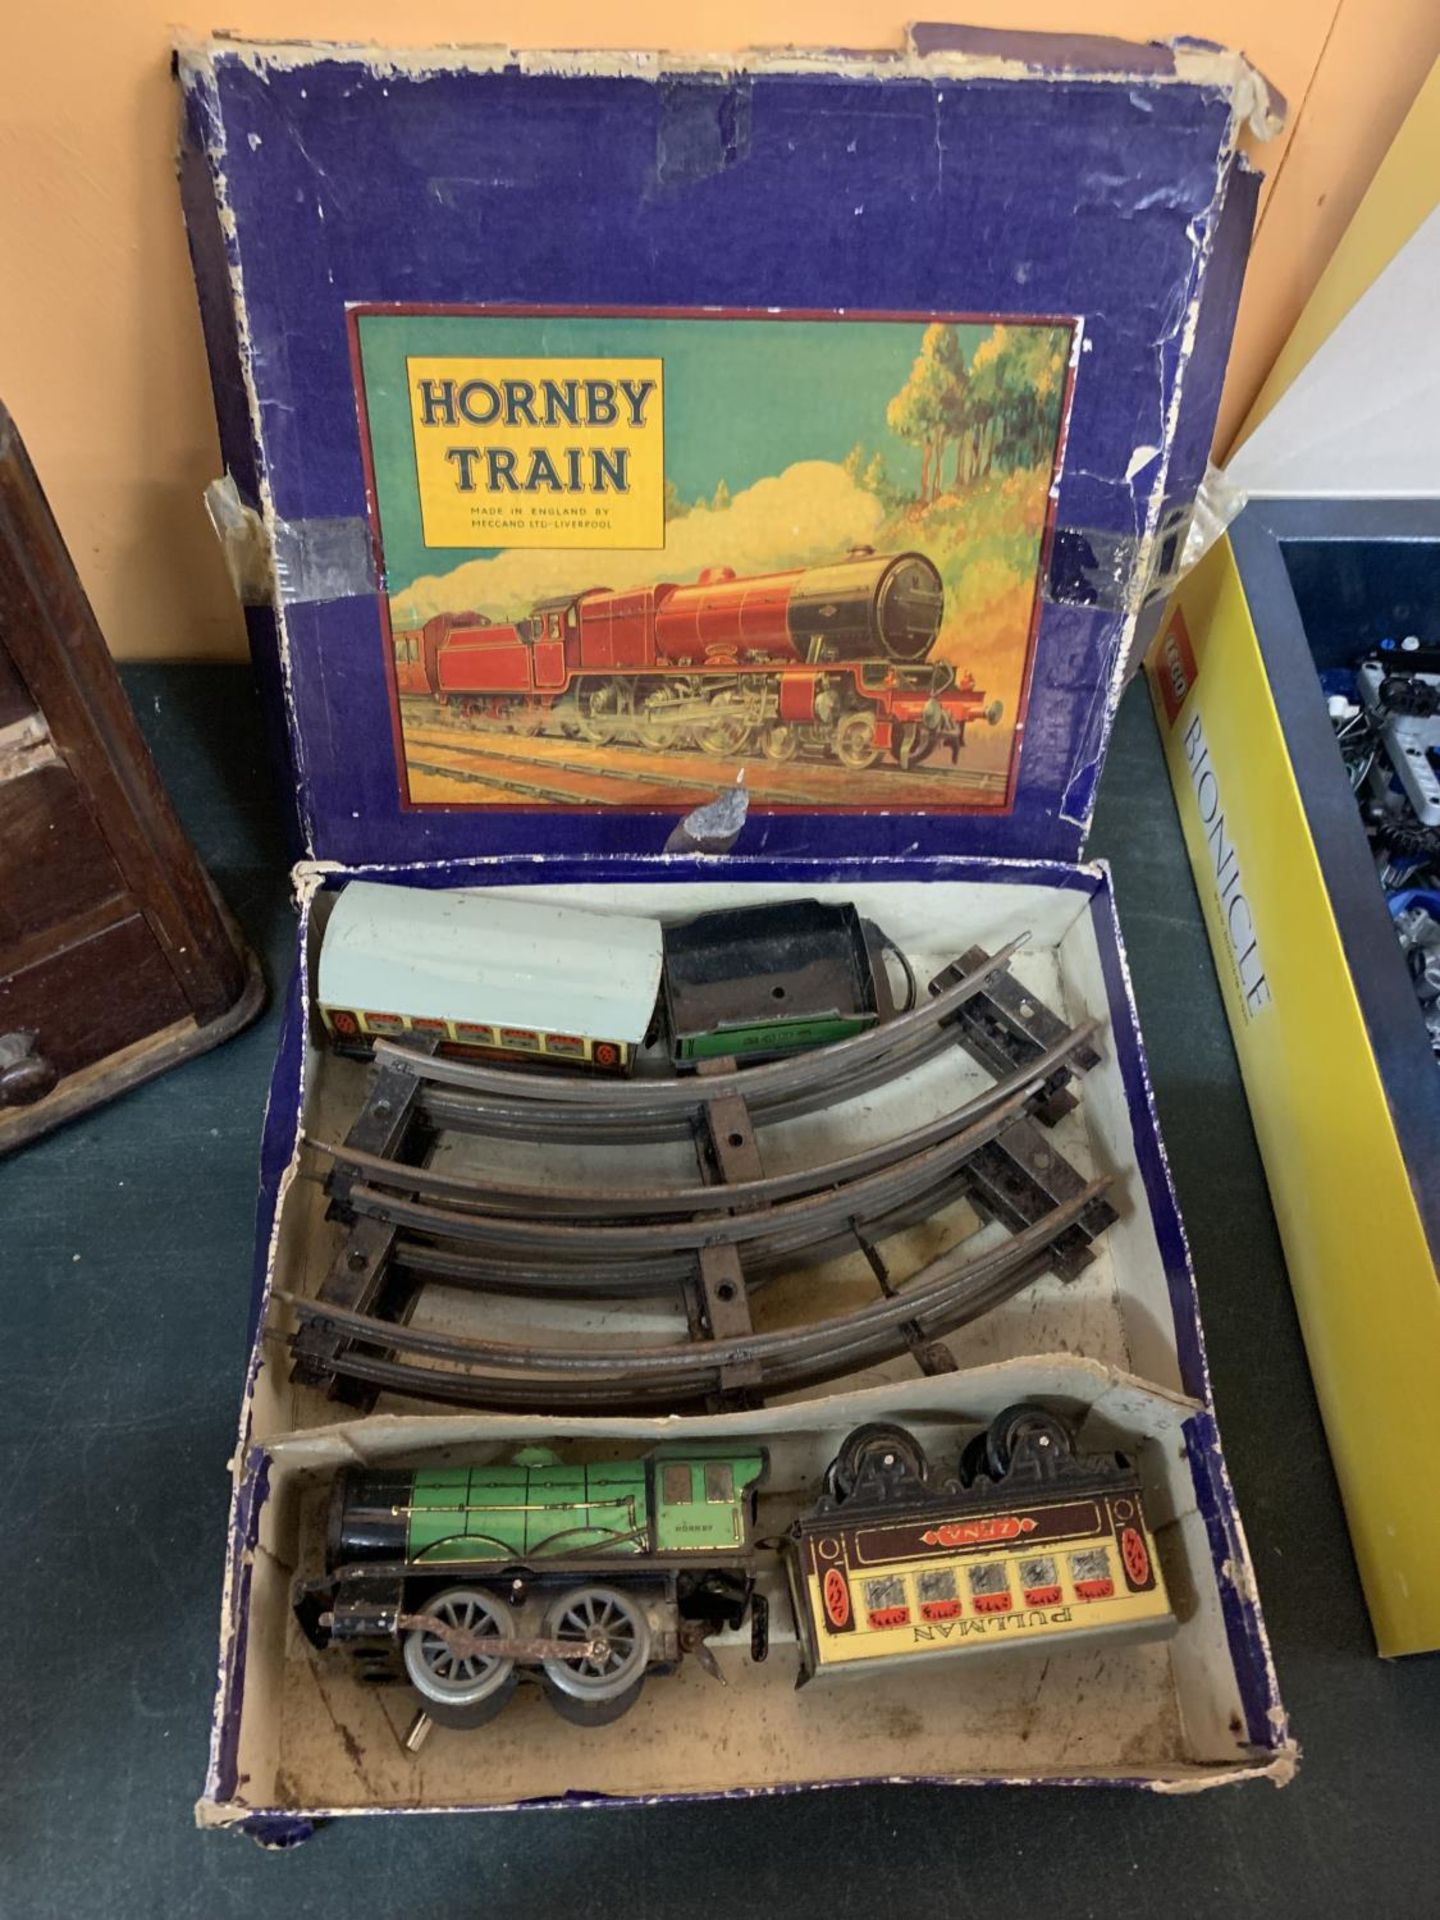 A BOXED VINTAGE HORNBY TRAIN SET TO INCLUDE AN ENGINE WITH TENDER, TWO PULLMAN CARRIAGES AND TRACK